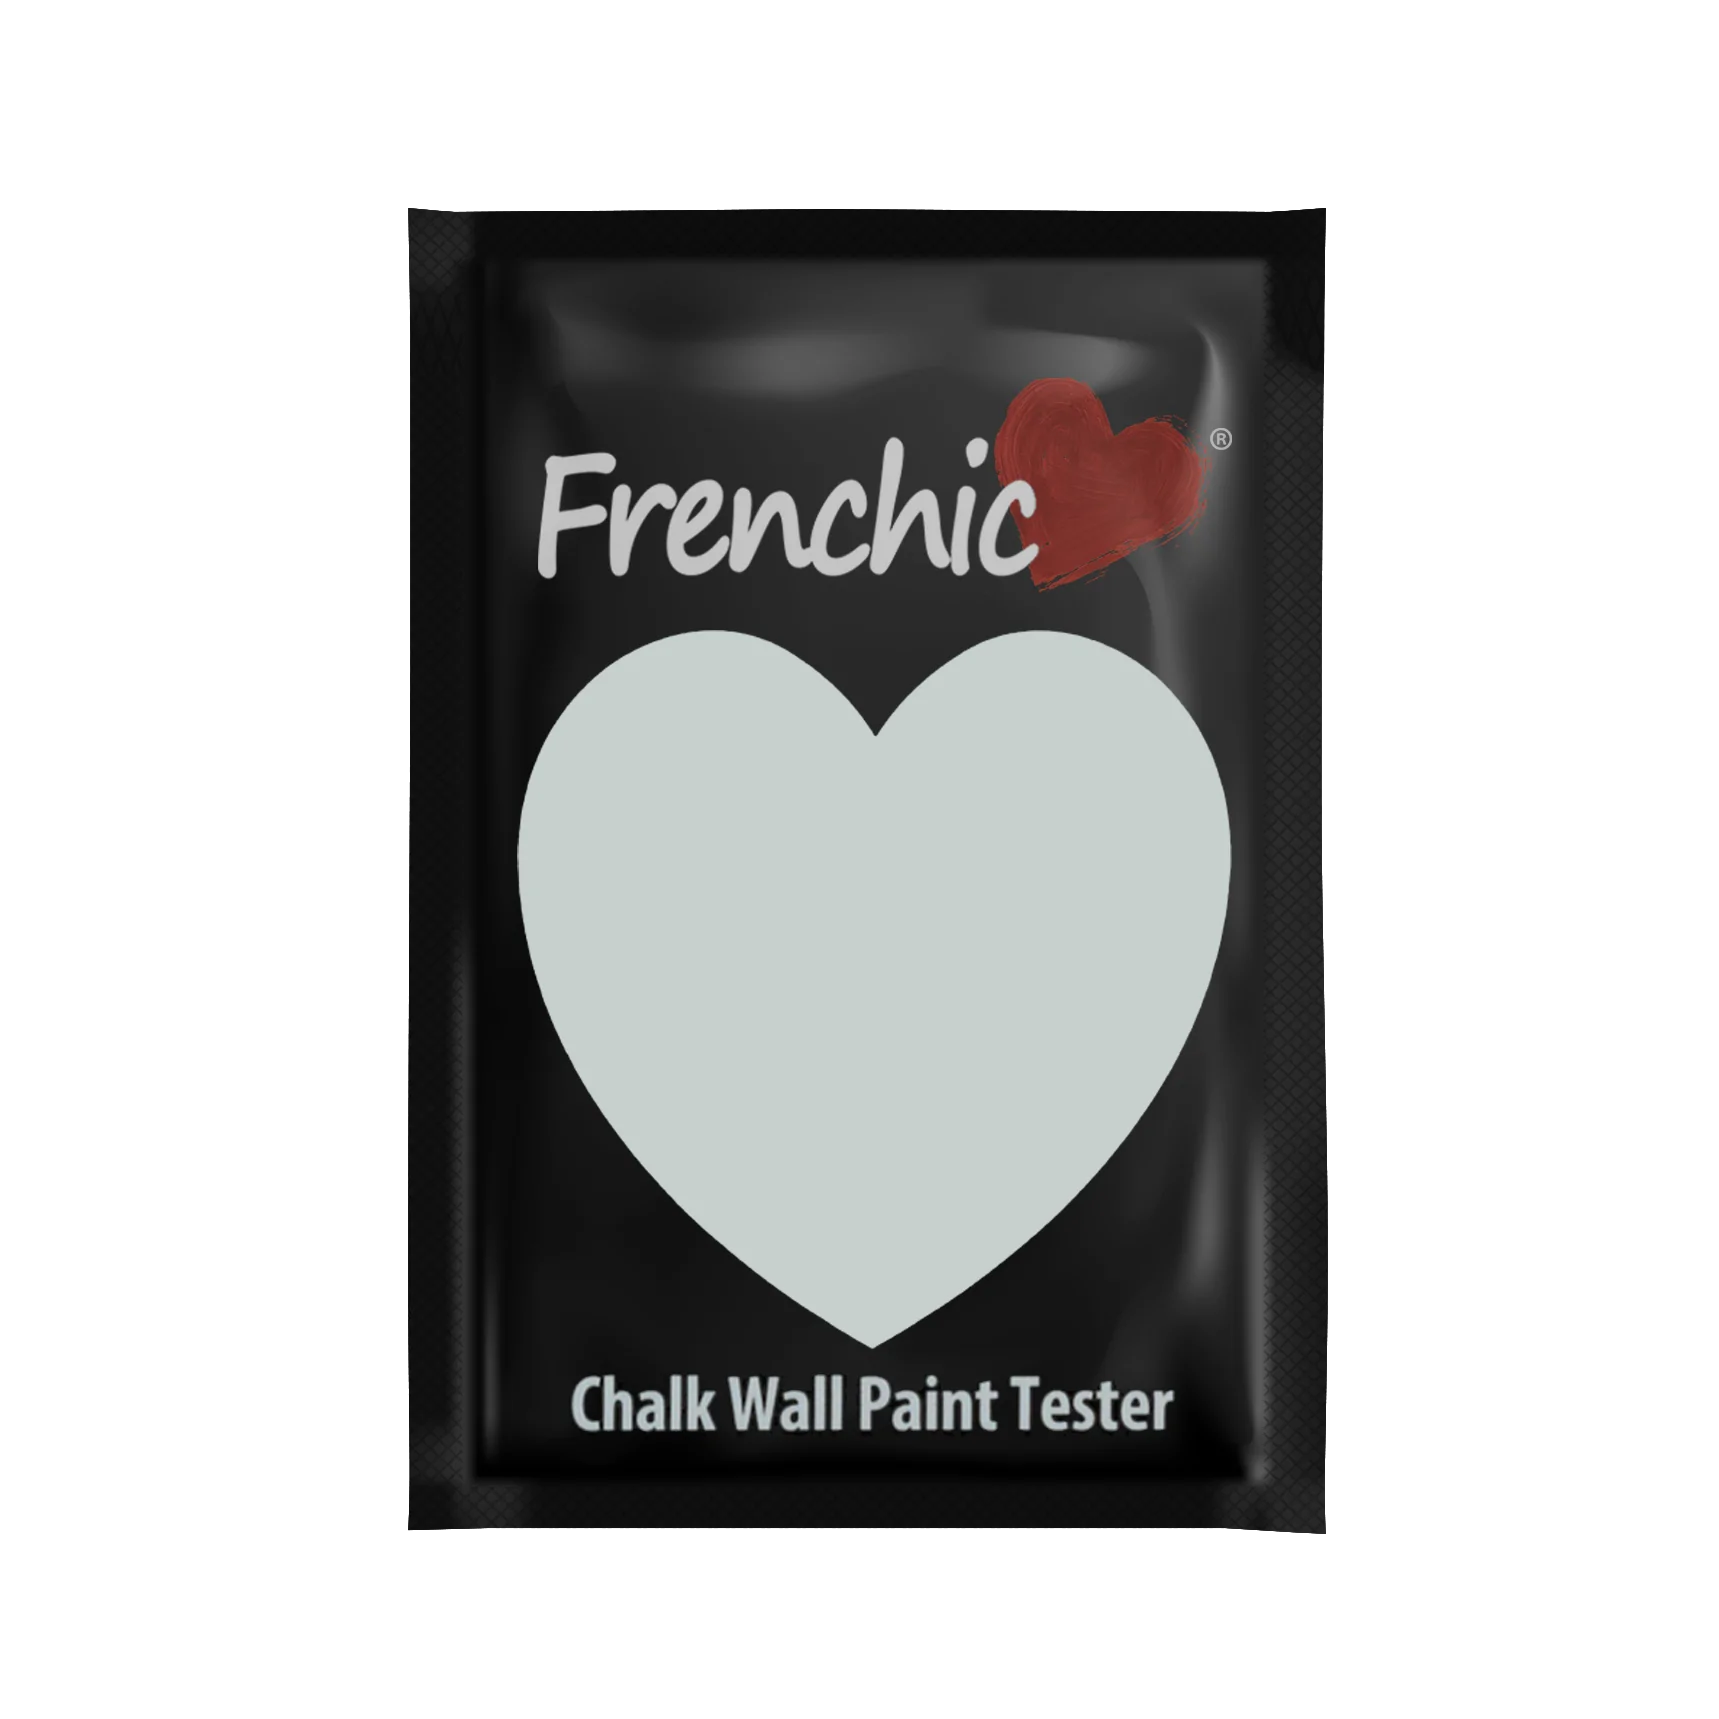 Frenchic Paint | Shush Paint Sample by Weirs of Baggot St